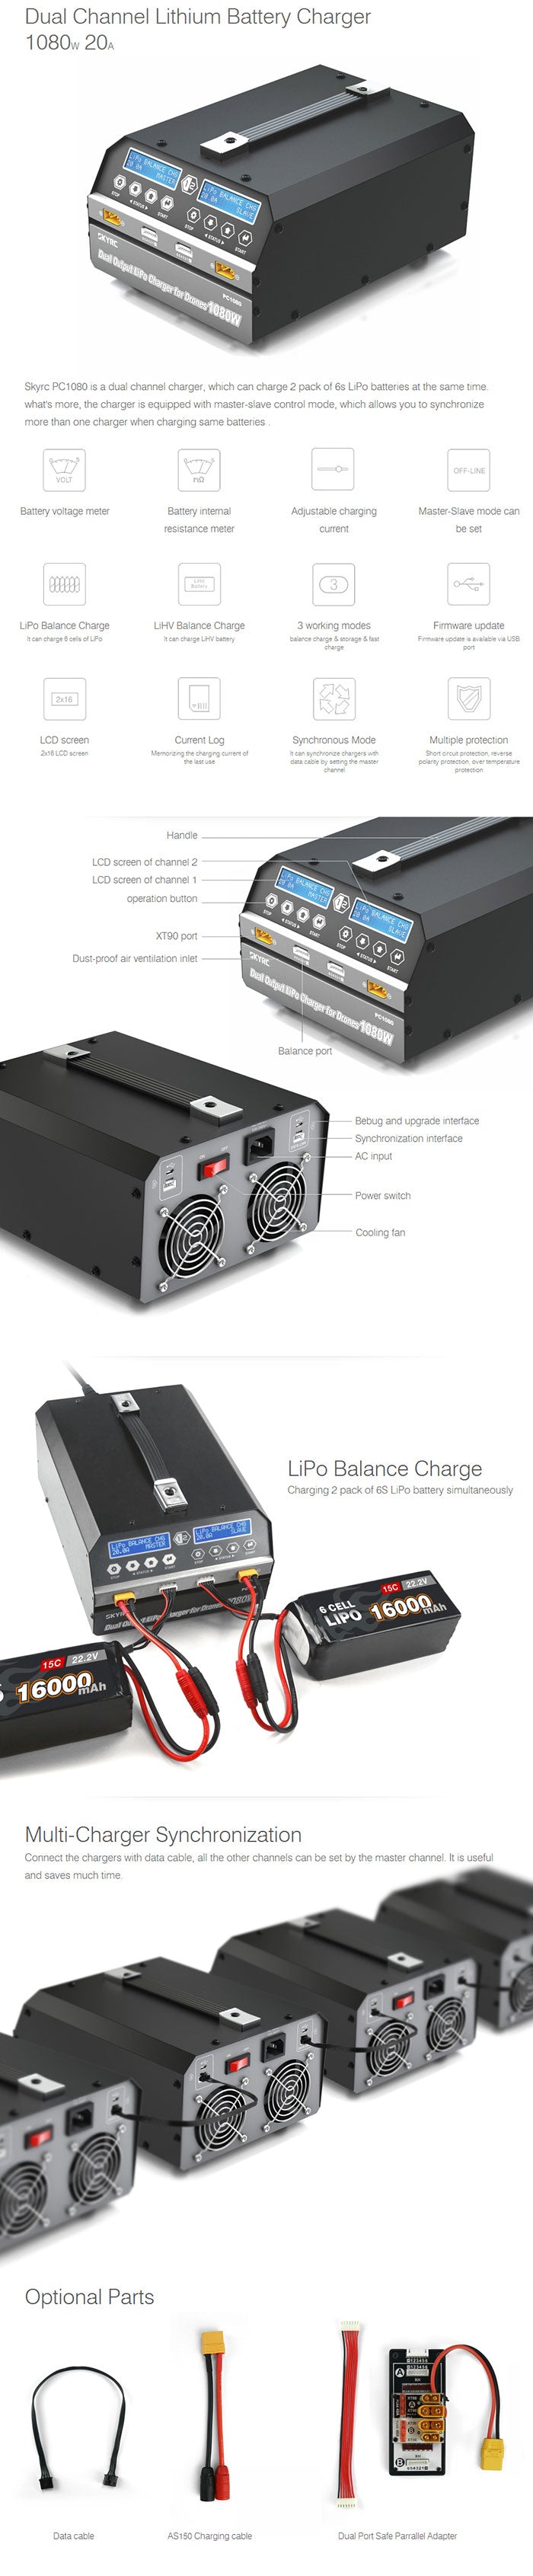 SKYRC PC1080 6S 20A Battery charger